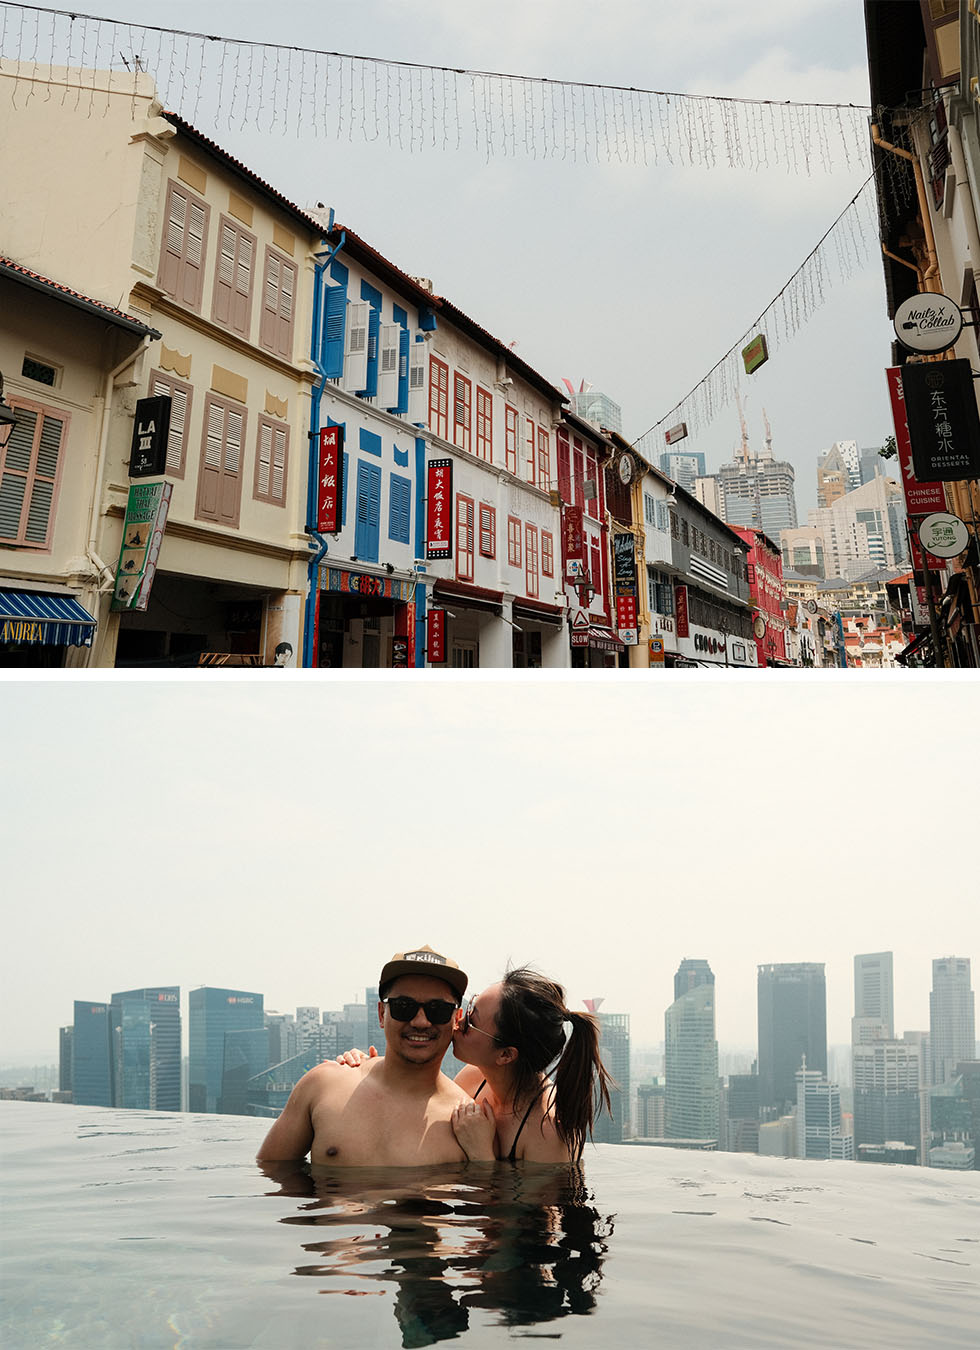 Two images, Maggie and Ryan enjoying their time in Singapore